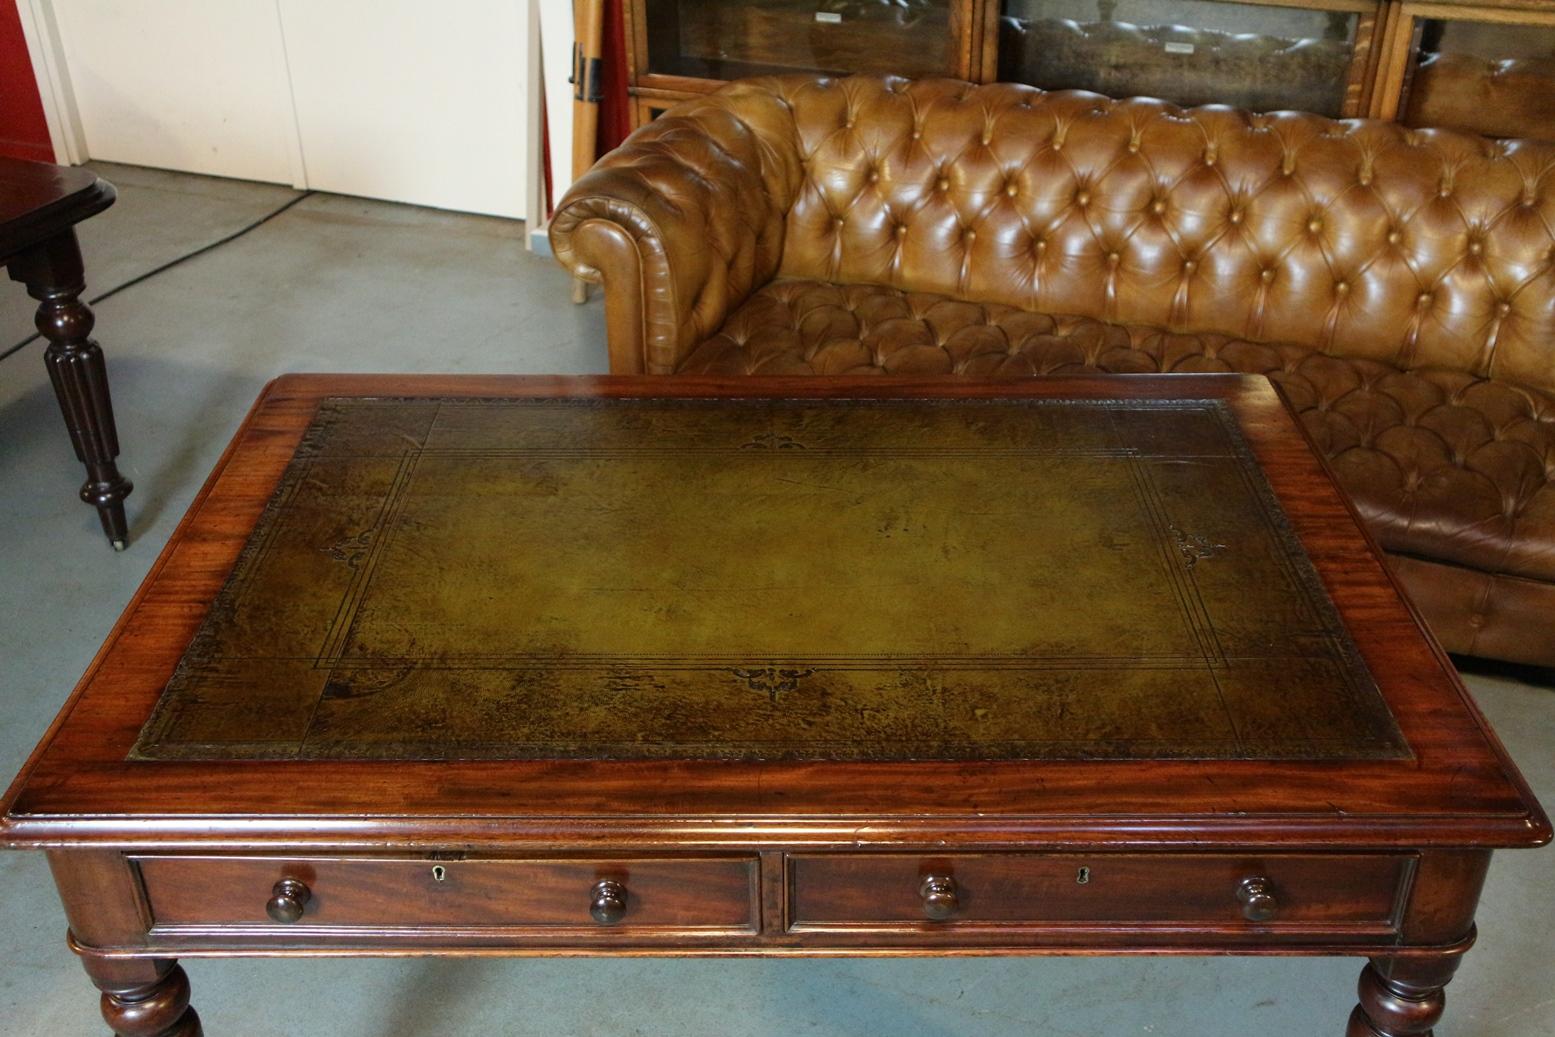 Beautiful antique mahogany writing table with 2 drawers on both sides. Beautiful green inlaid leather with blind profiling. Entirely in perfect condition.
Origin: England
Period: circa 1820 (Georgian)
Size: 136 cm x 92 cm x 75 cm (legroom 58 cm).